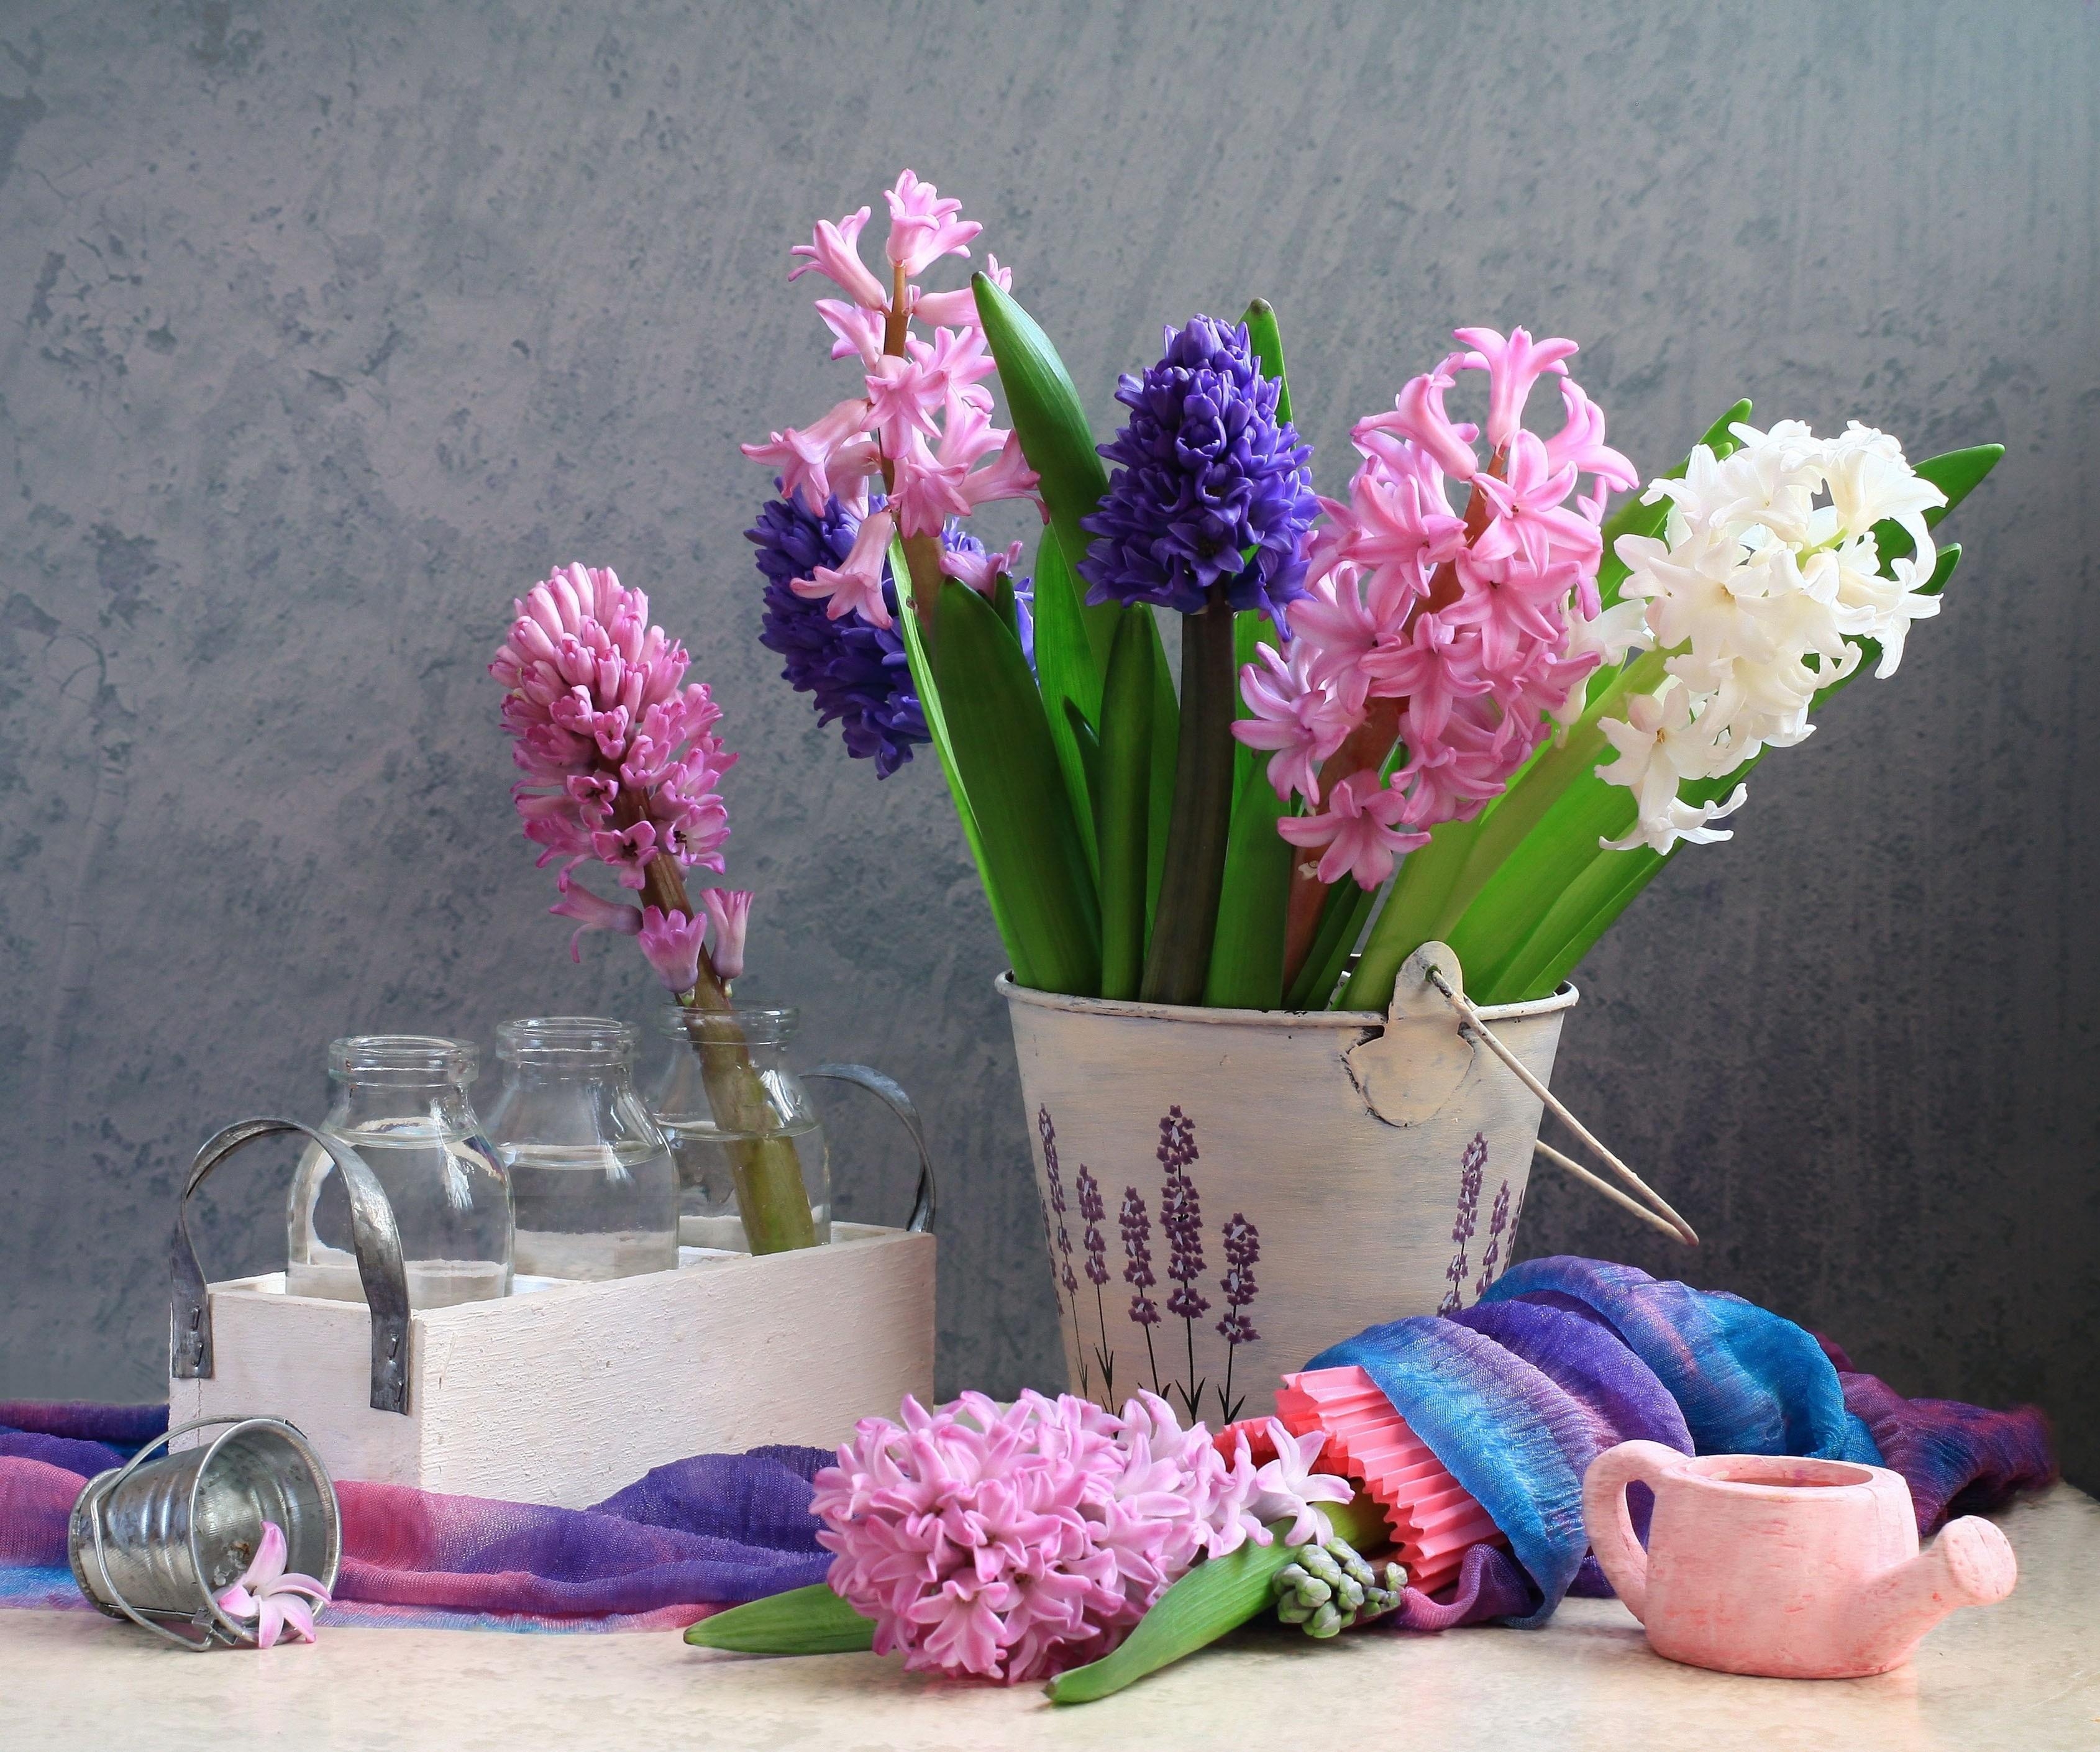 still life, spring, flowers, bottle, bottles, hyacinths, bucket, watering can High Definition image